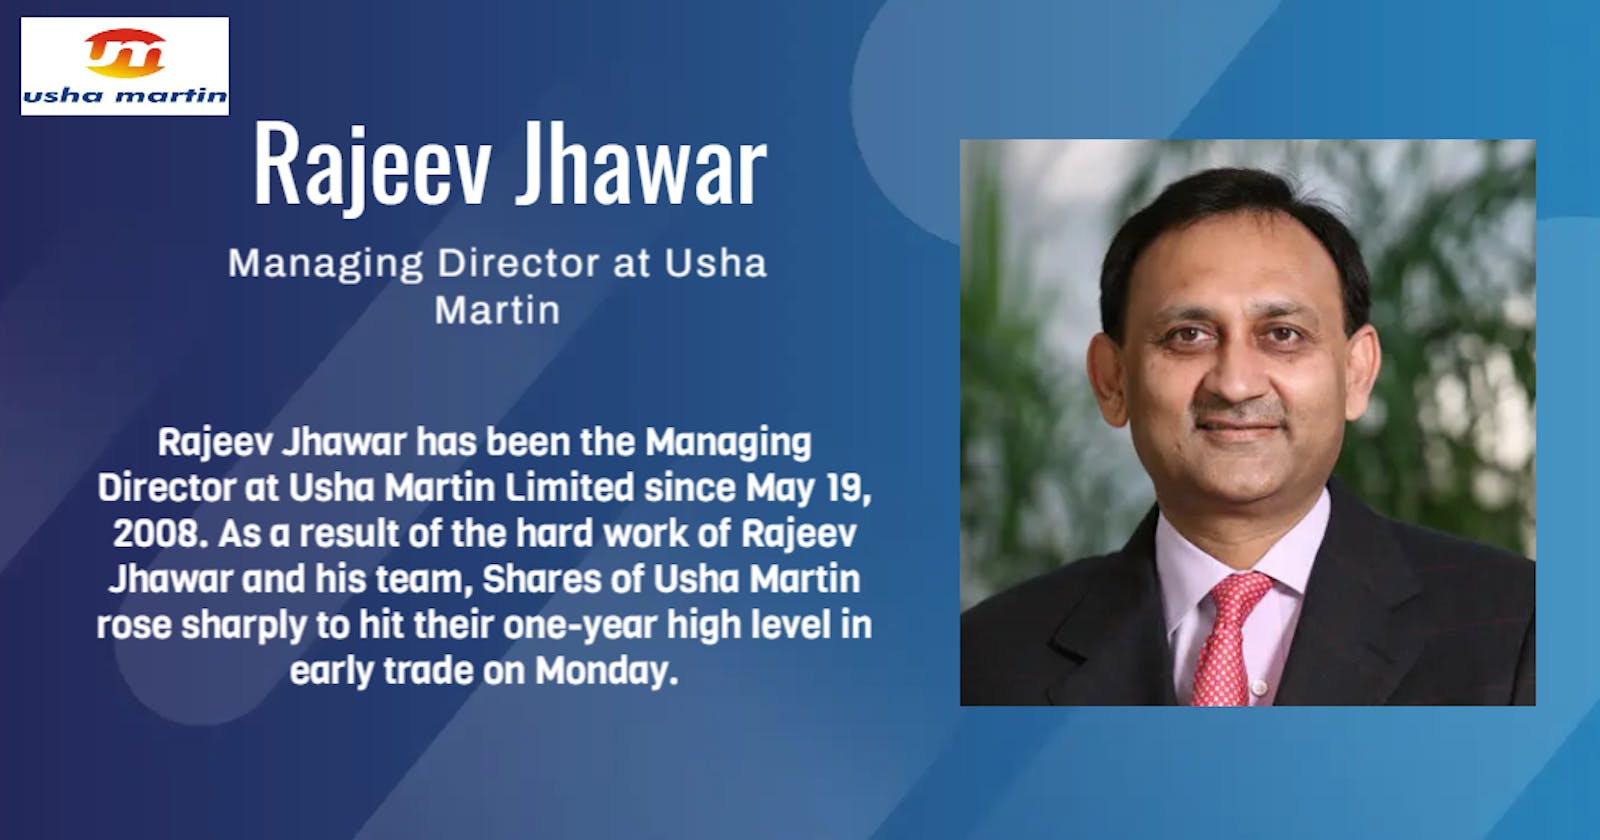 Rajeev Jhawar Reappointed As Managing Director Of Usha Martin For The Subsequent 5 Years